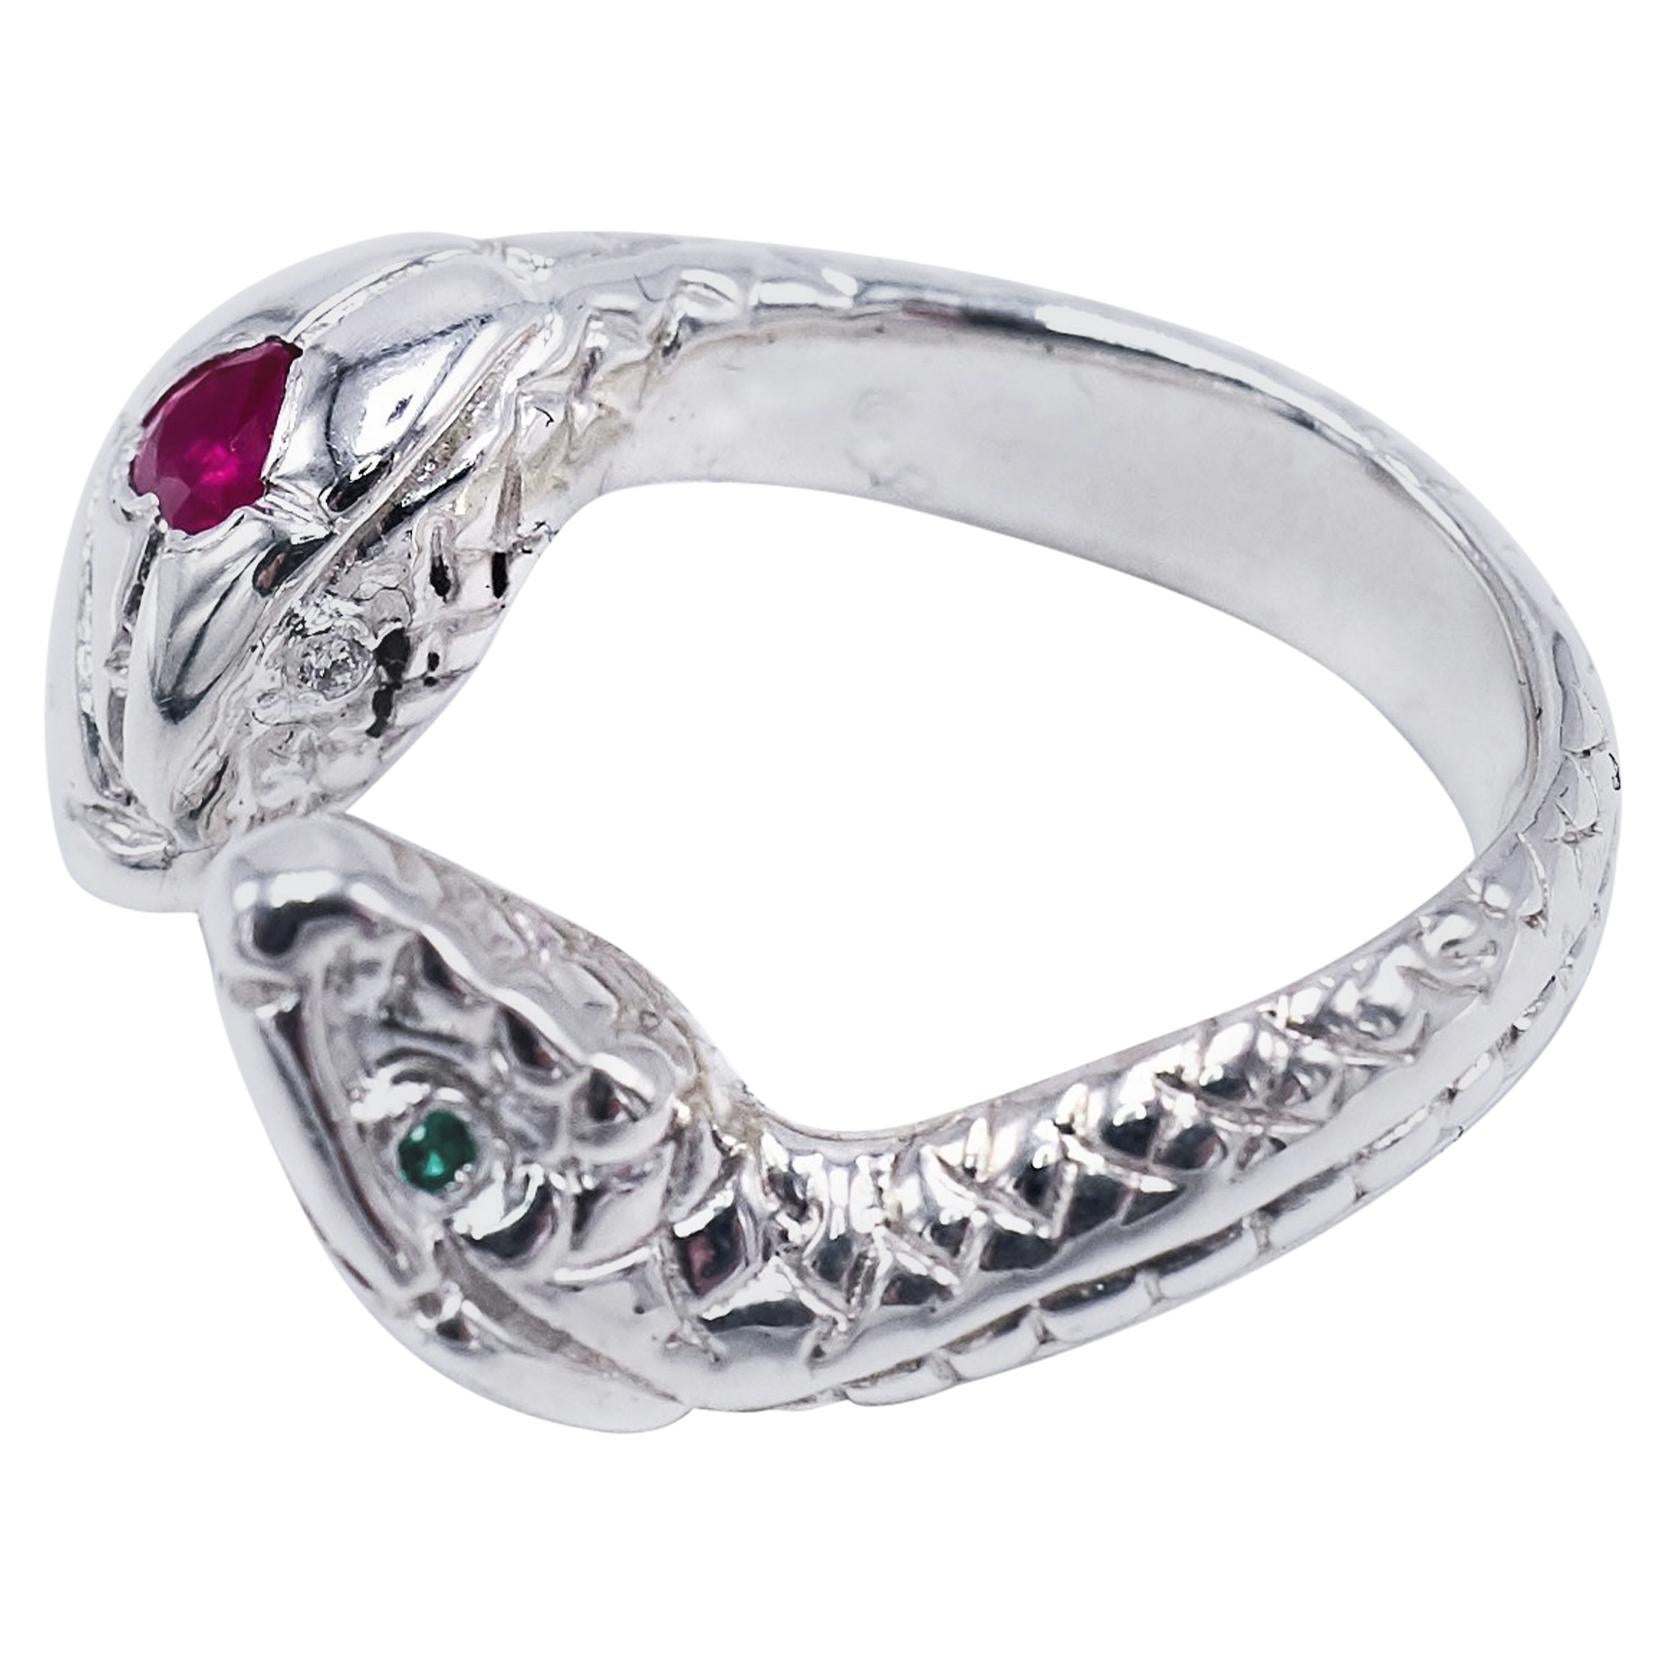 White Diamond Emerald Heart Ruby Snake Ring Silver Cocktail Ring J Dauphin For Sale